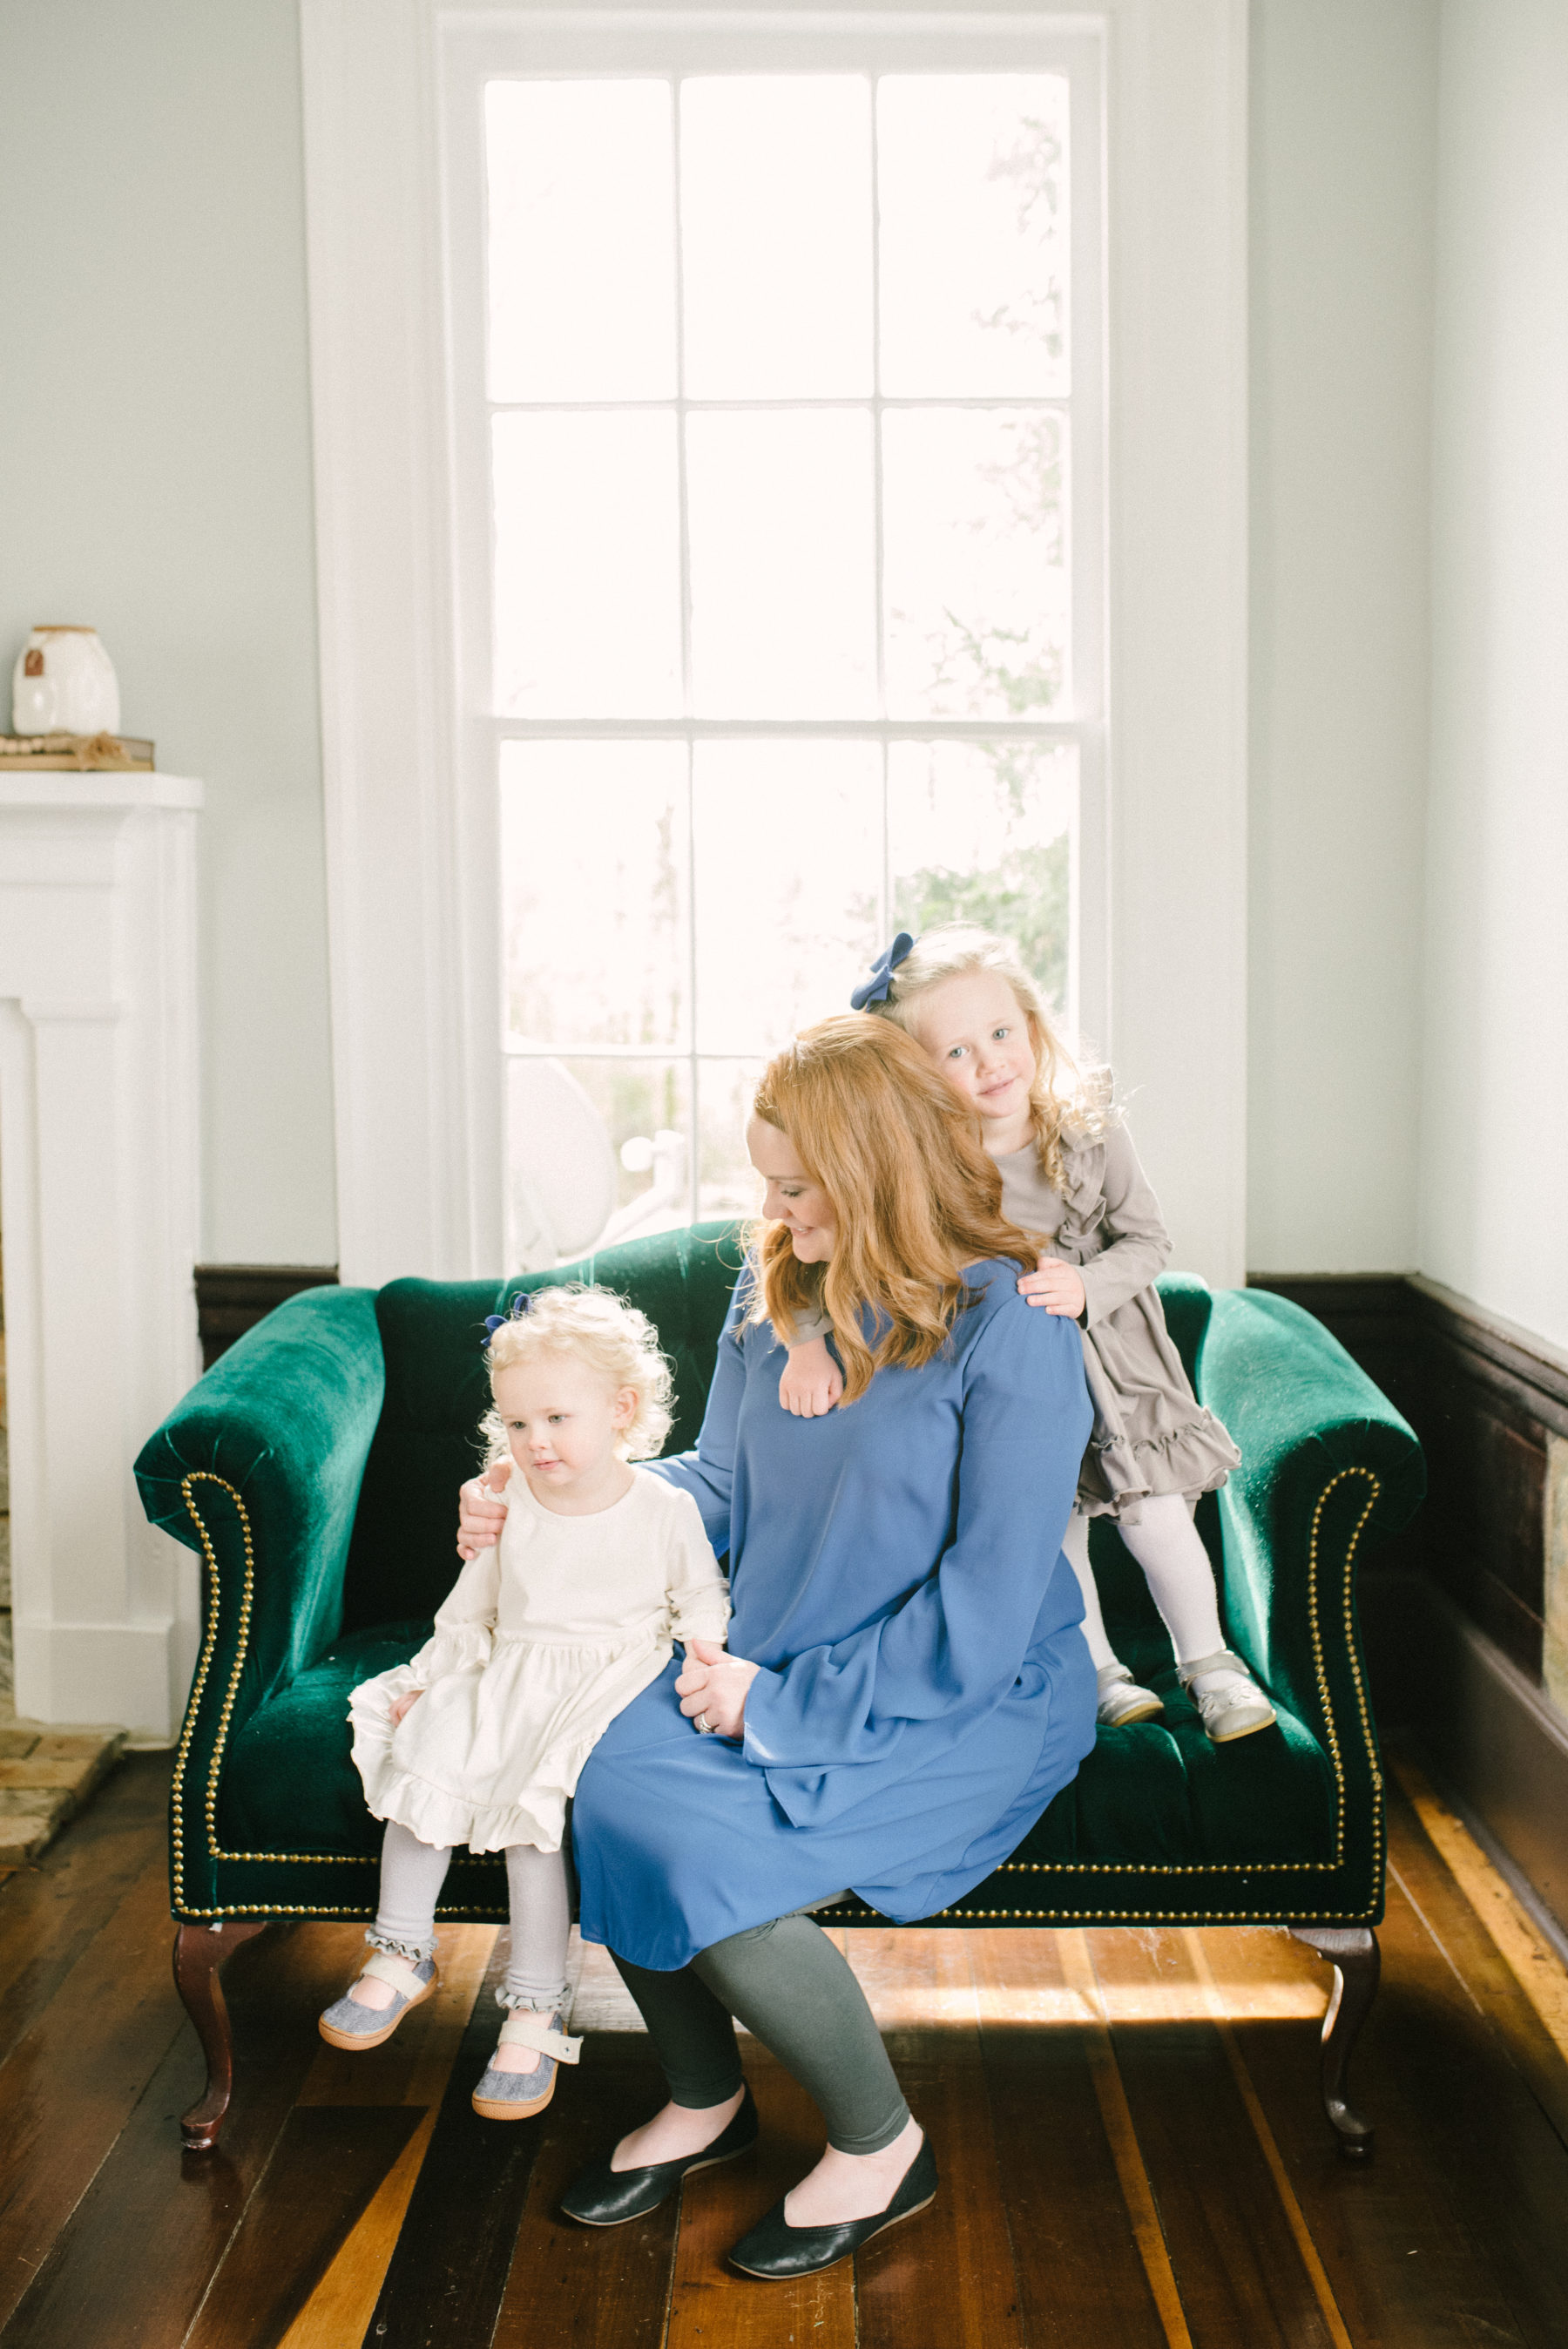 Dolly Delong Family Photo Inspiration featured on Nashville Baby Guide